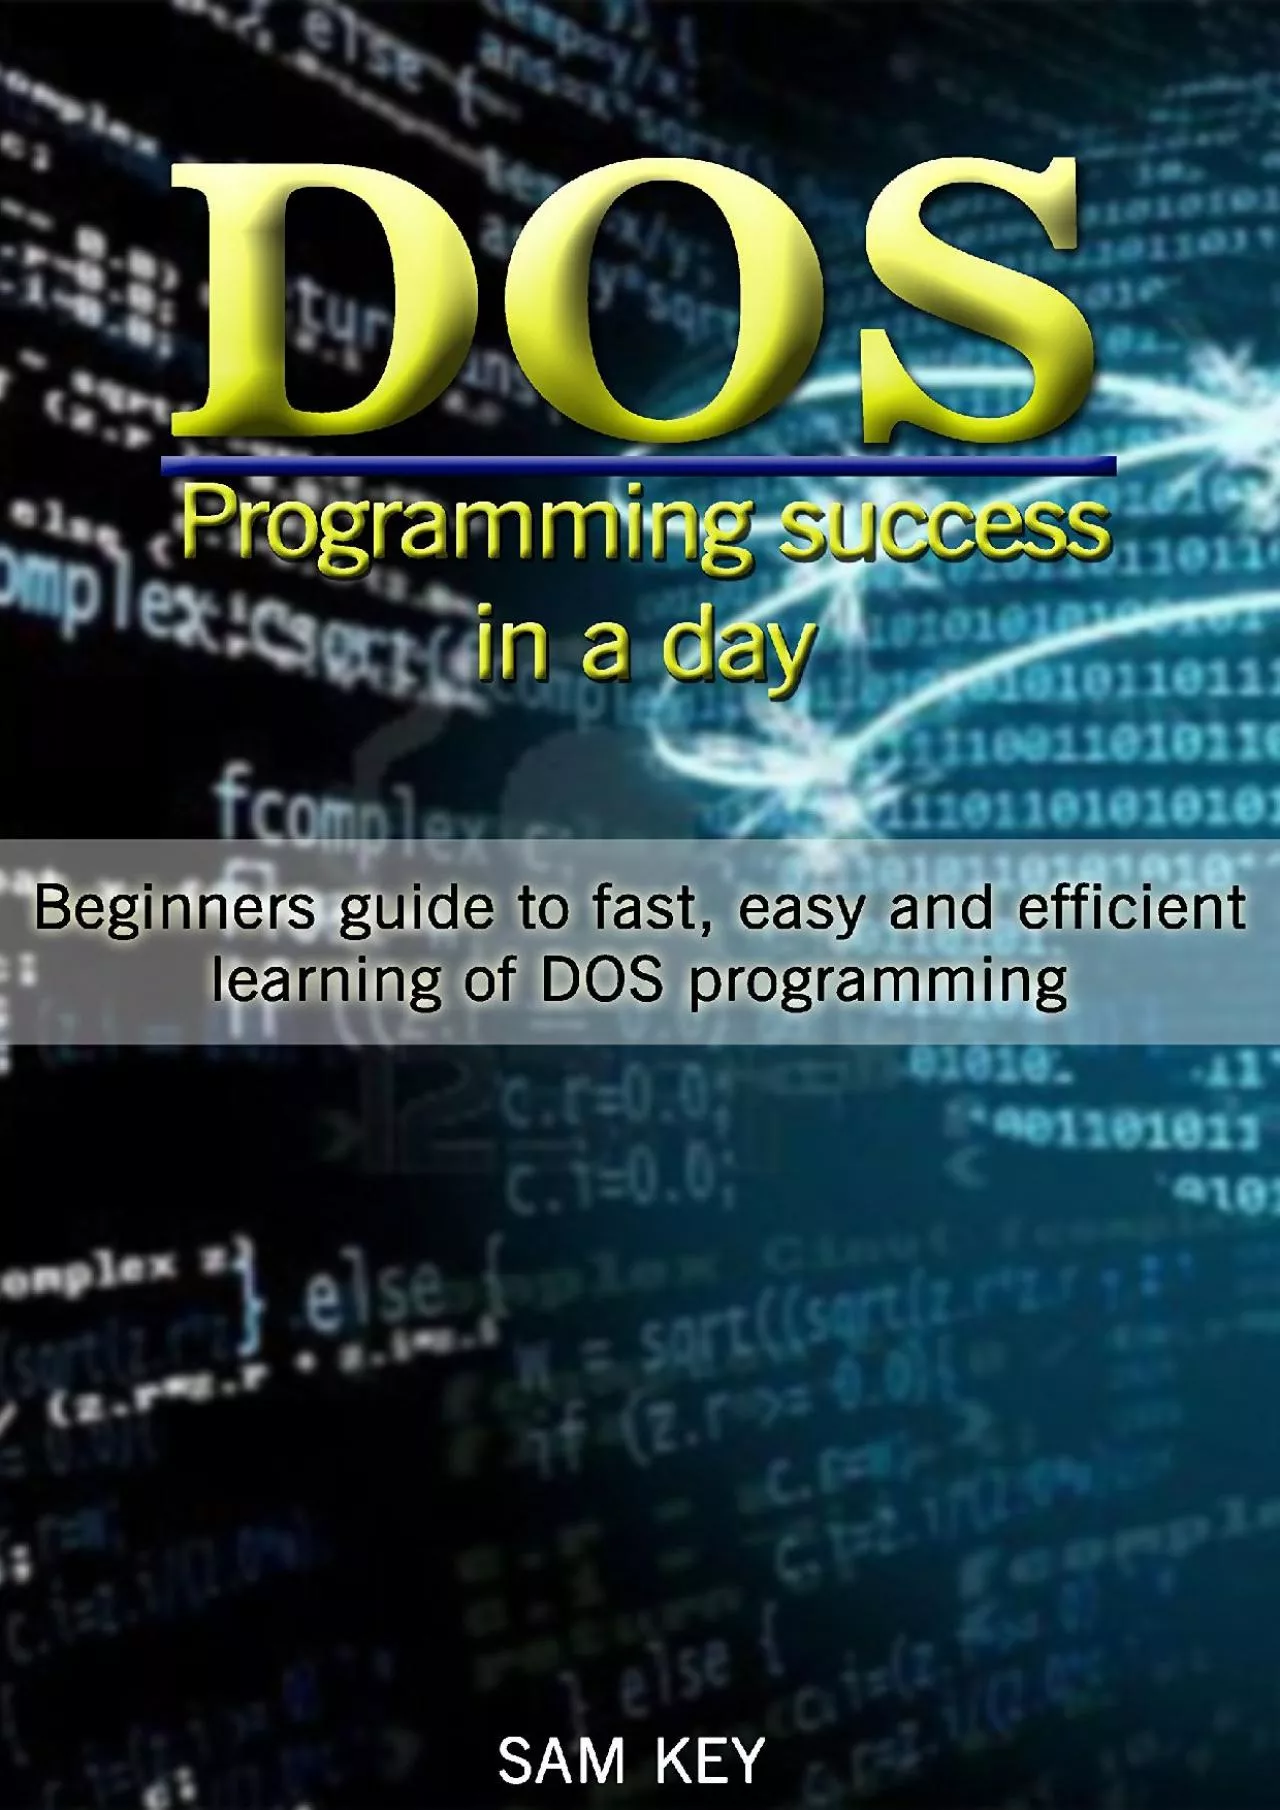 [READING BOOK]-DOS: Programming Success in a Day: Beginners guide to fast, easy and efficient